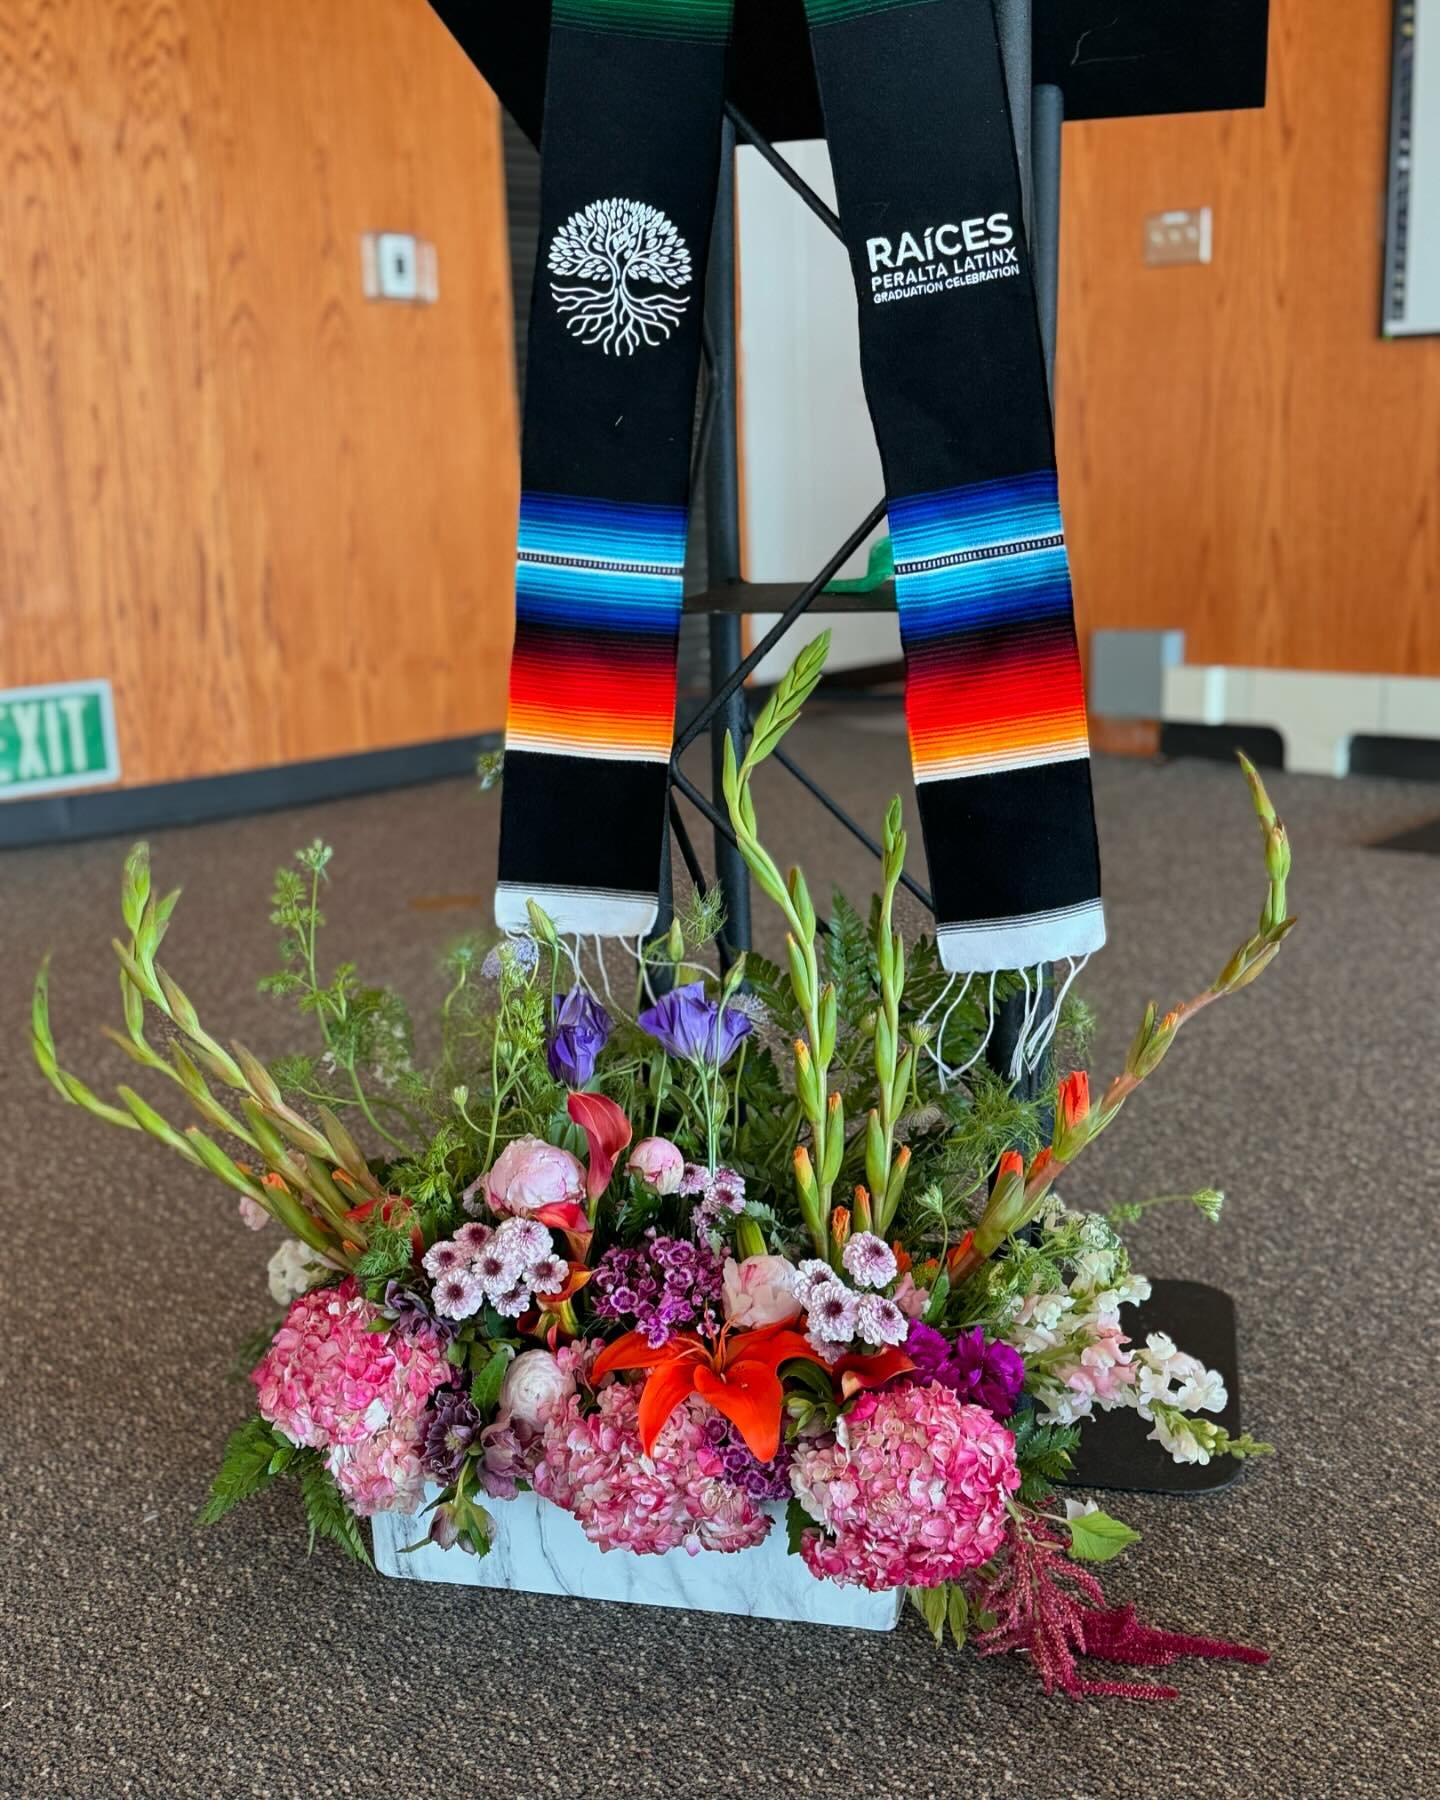 Such an honor to be a part of Merritt College&rsquo;s Latinx event tonight.  Putting these vibrant colors together filled my heart with so much joy ❤️
.
.
#graduation #commensement #latinx #peraltacolleges #oakland #comolaflor #latinpride #latinherit